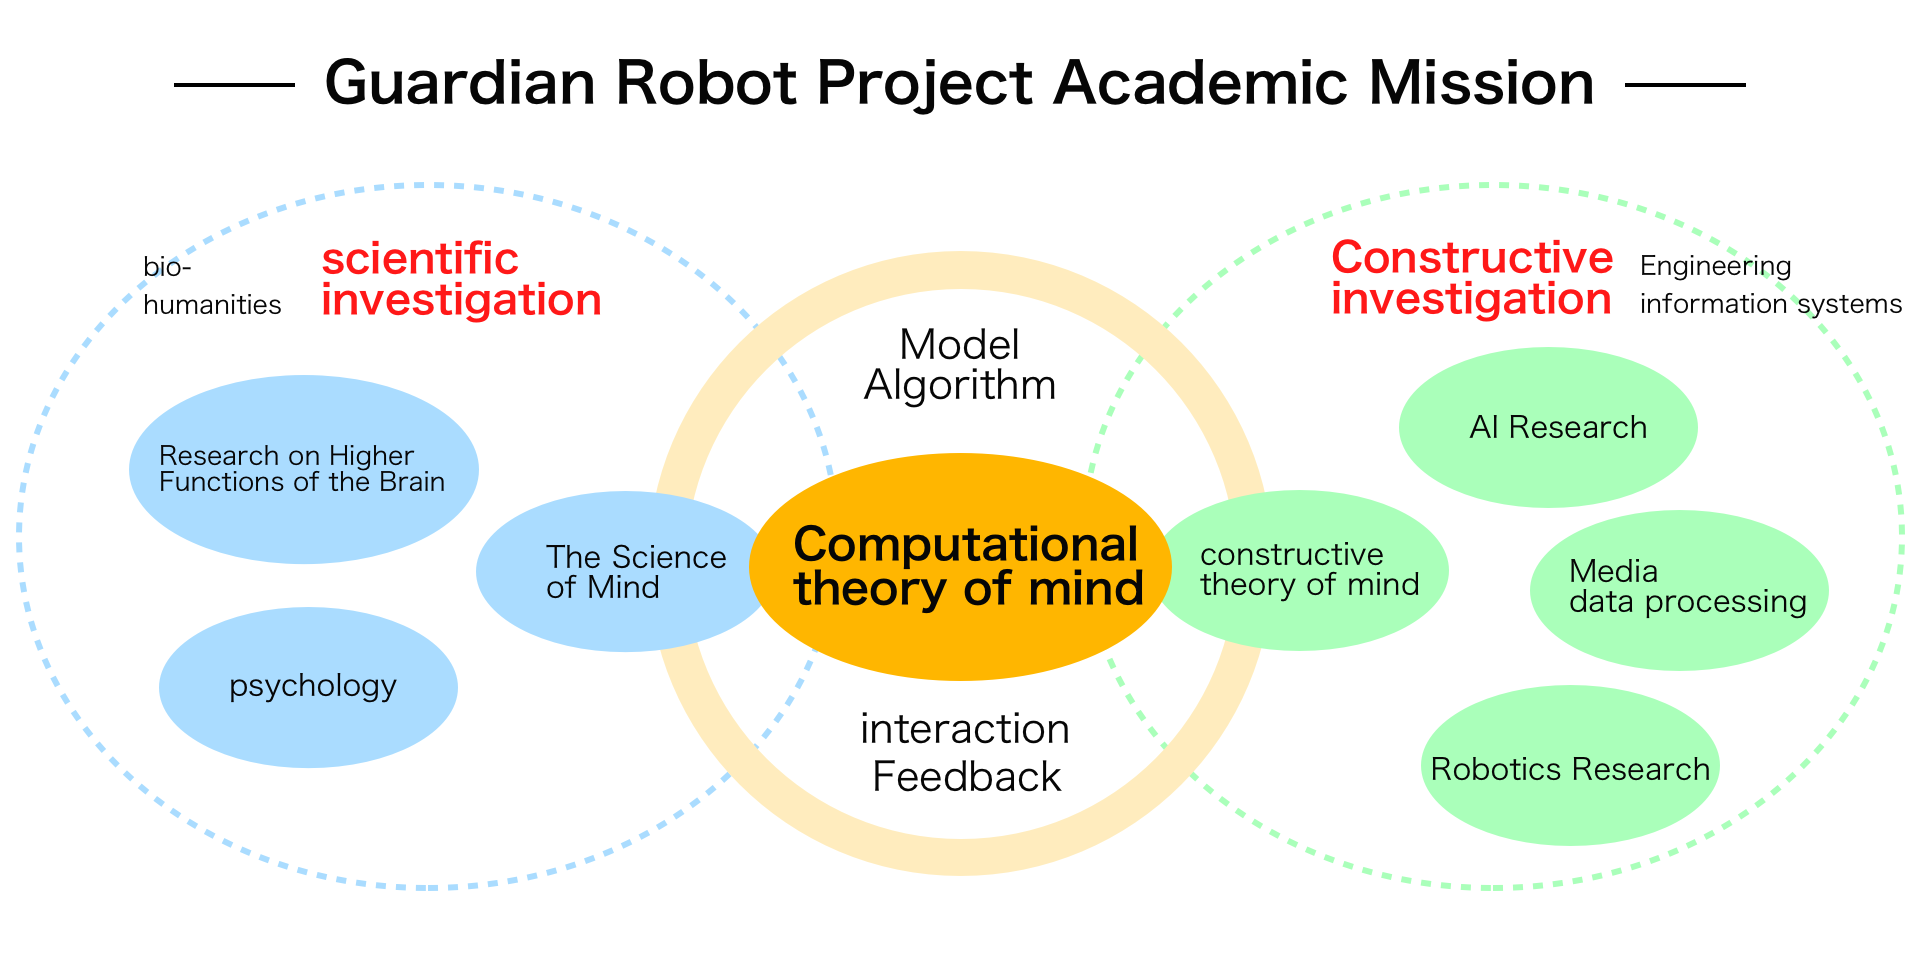 Guardian Robot Project Academic Mission